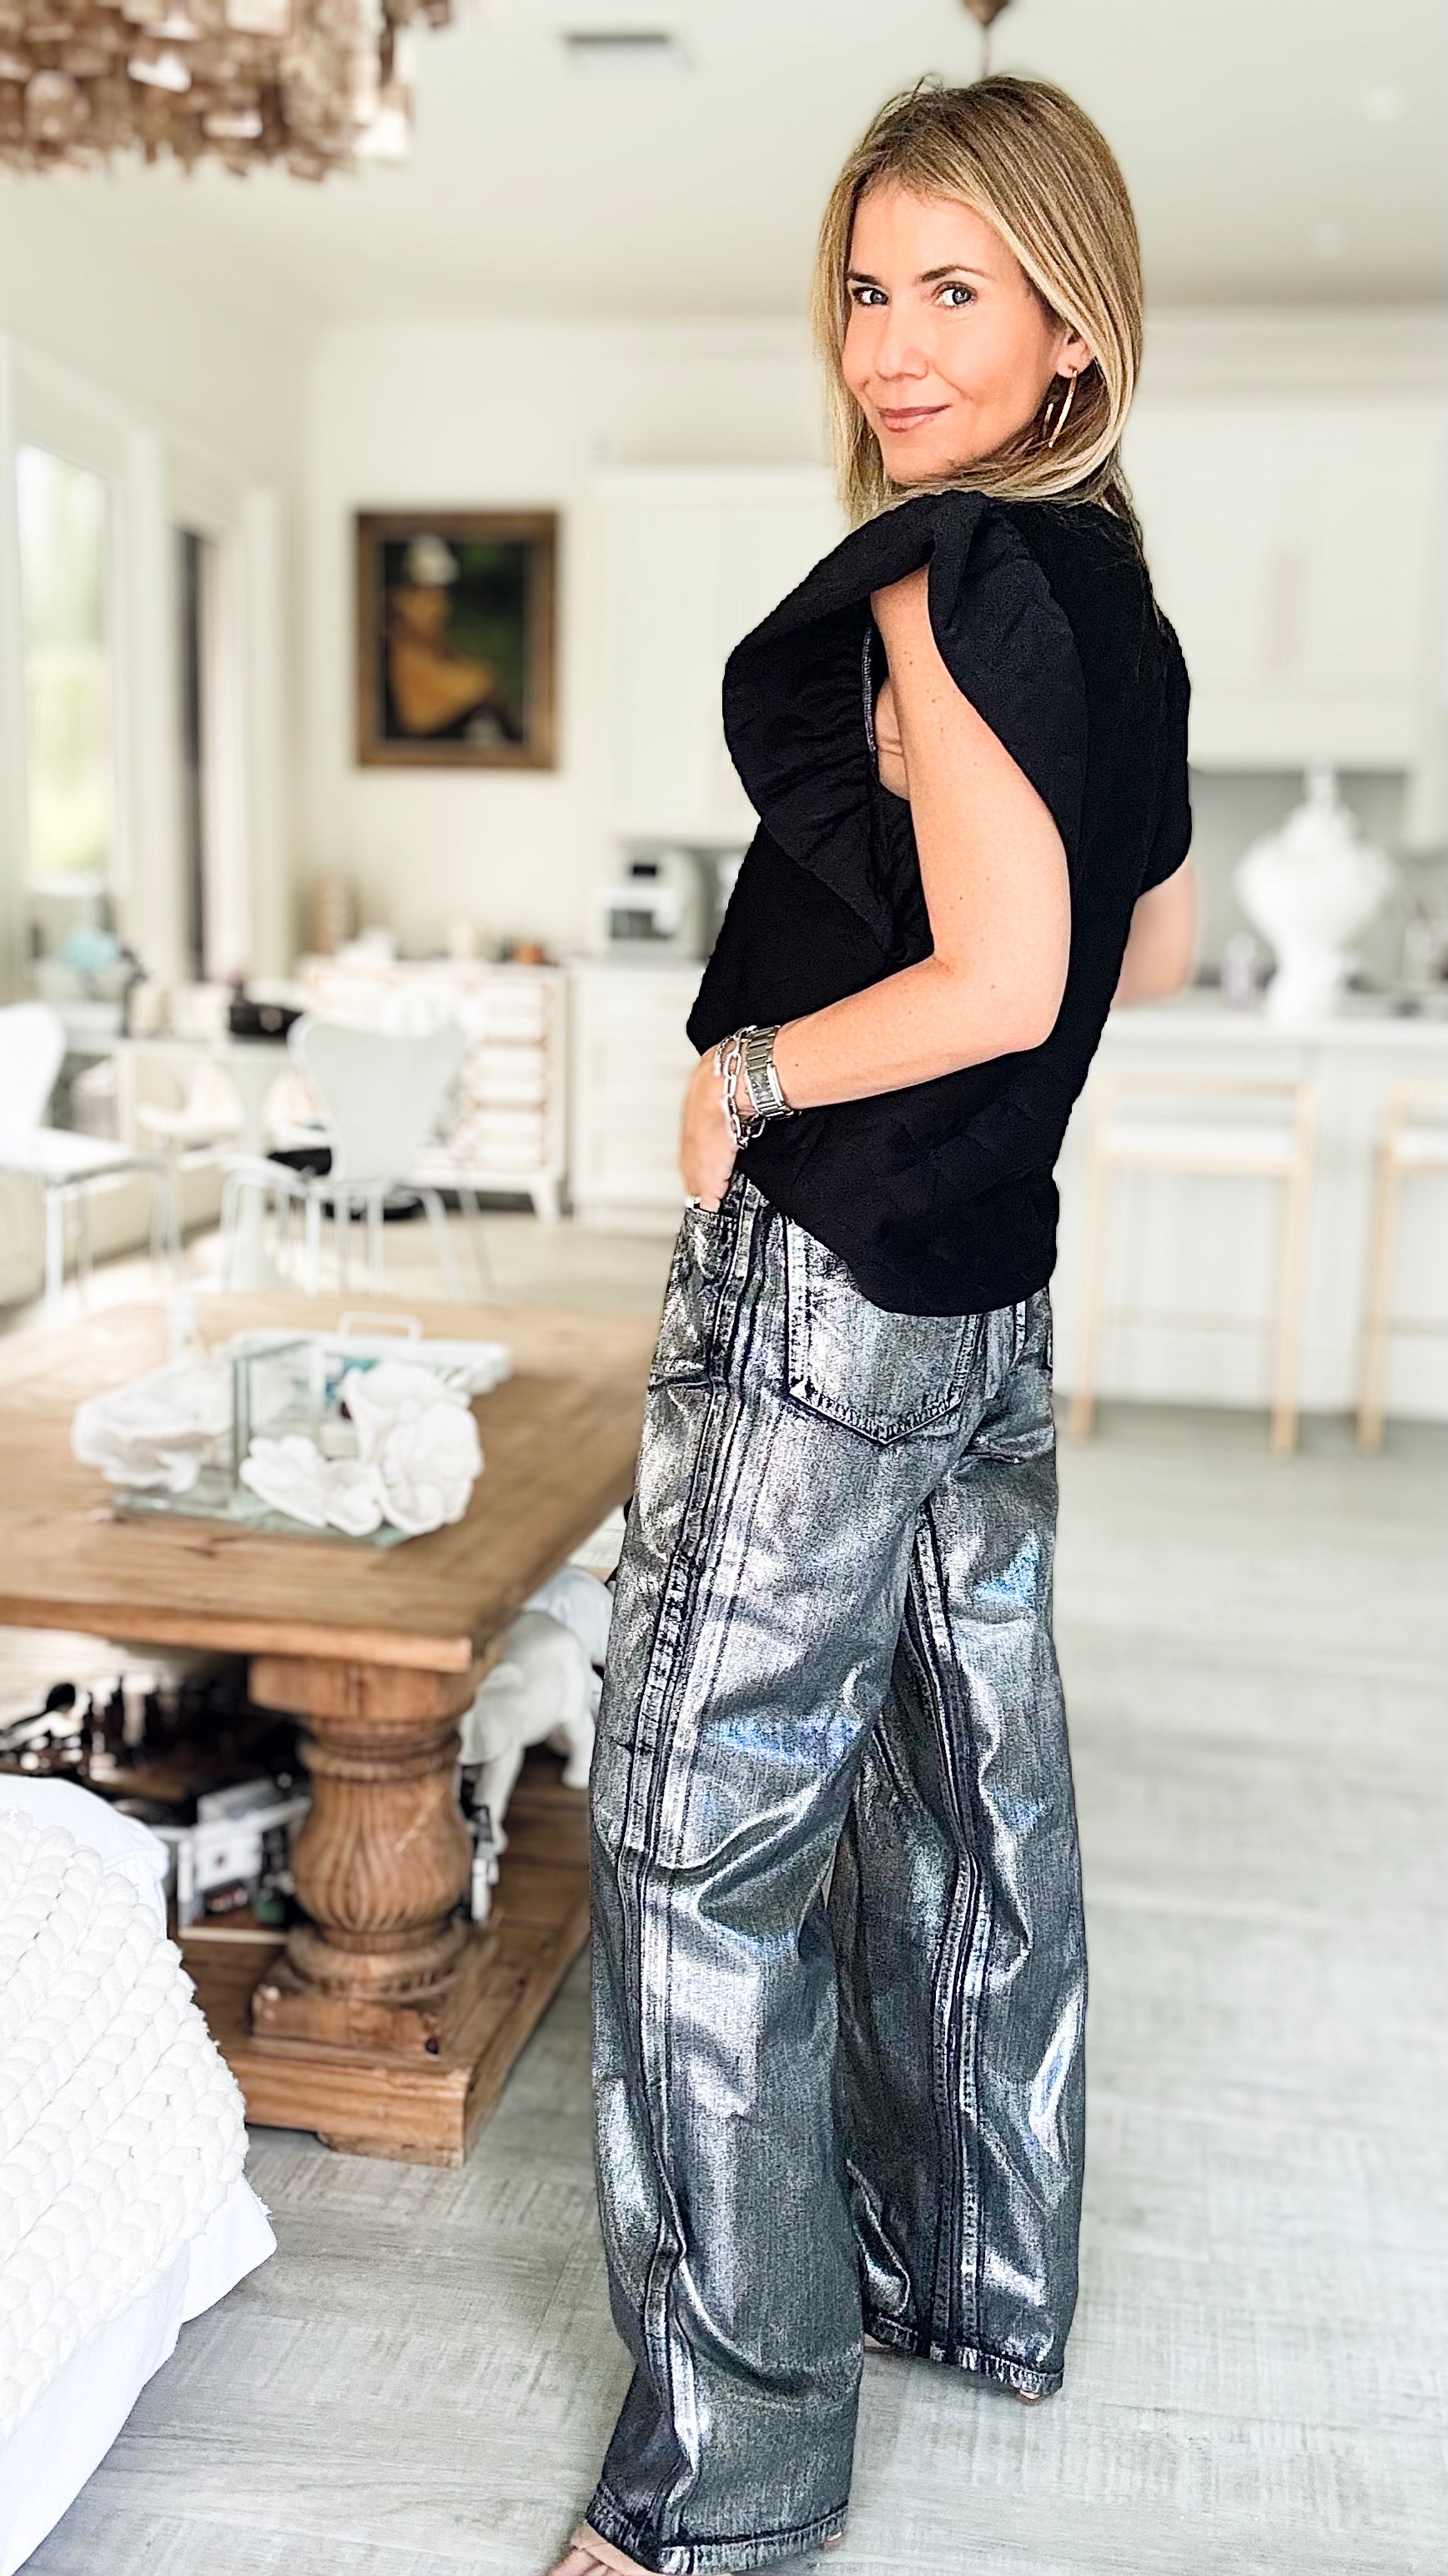 Blackout Metallic Jean - Black/Silver-170 Bottoms-MISS LOVE-Coastal Bloom Boutique, find the trendiest versions of the popular styles and looks Located in Indialantic, FL